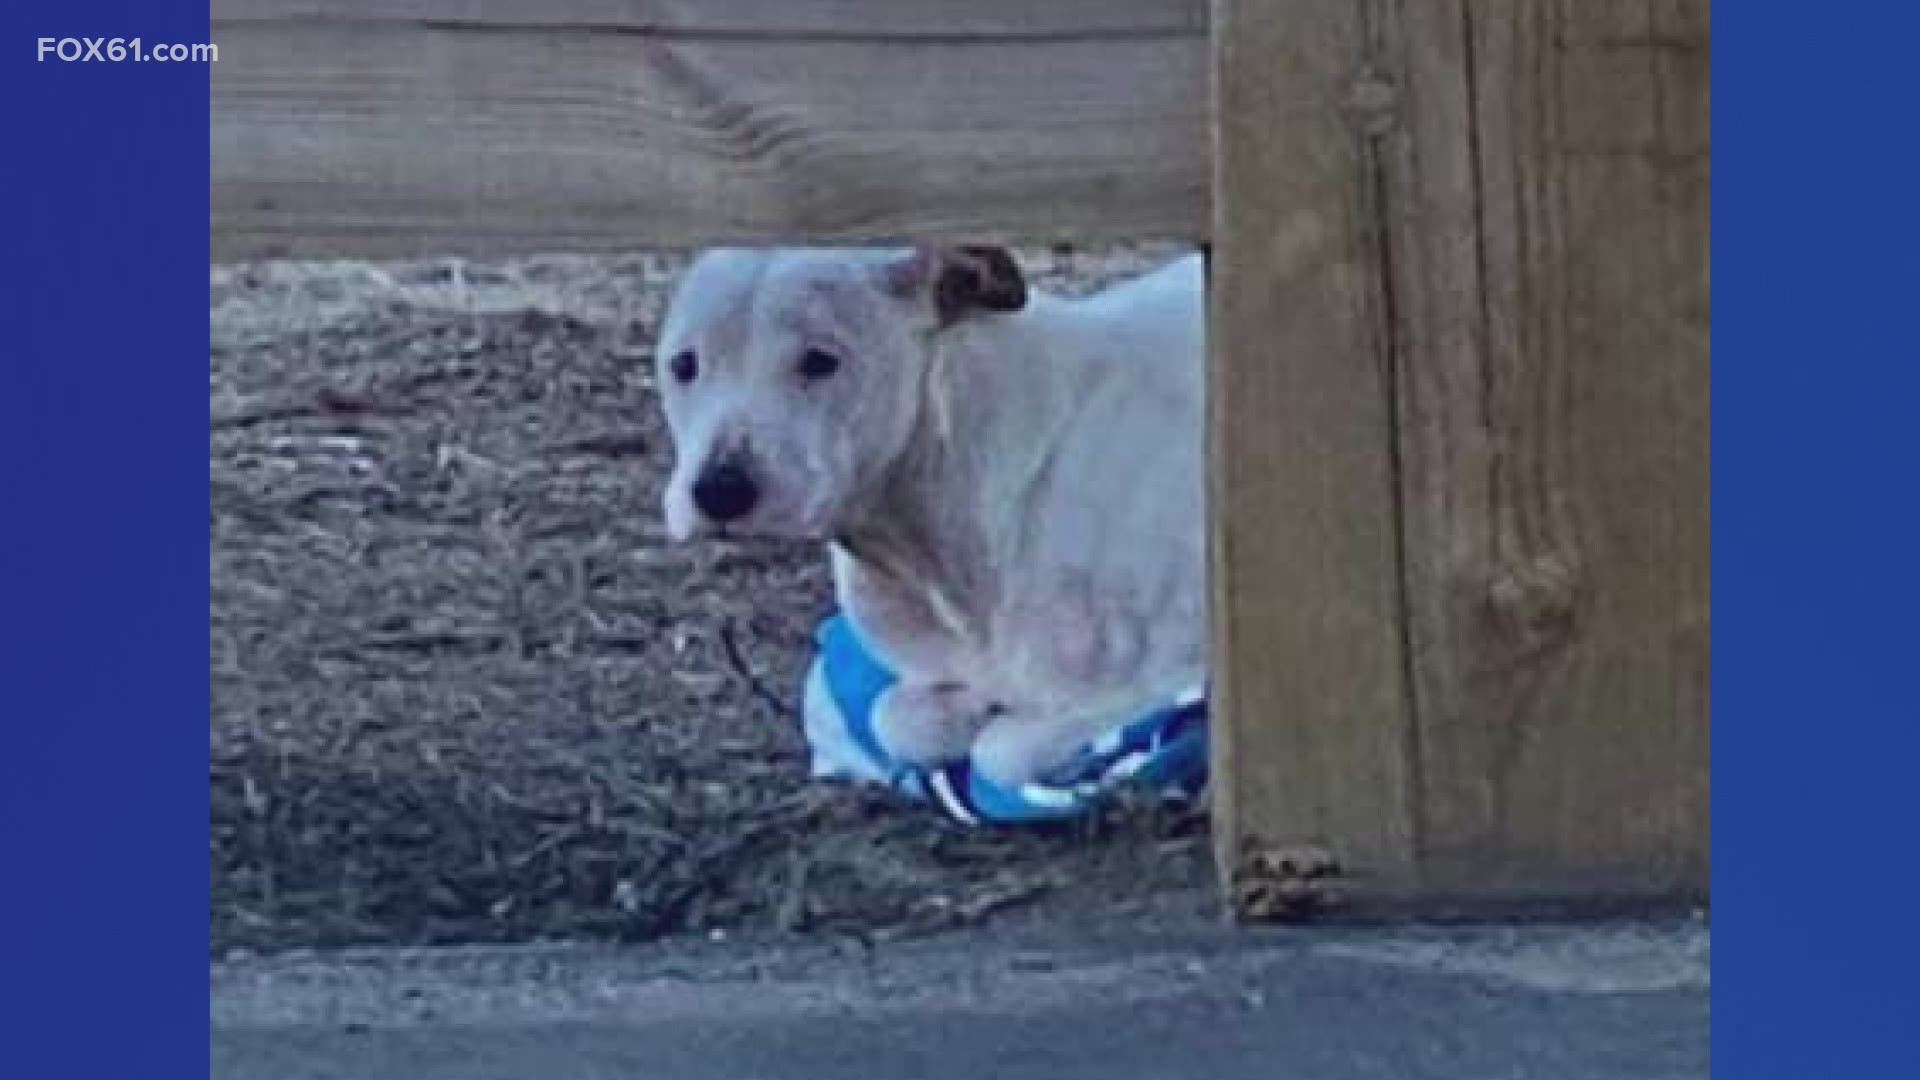 The shelter said that the dog was at least 10-20 pounds underweight and had démodex mange, overgrown toenails, and had pressure sores from being crated